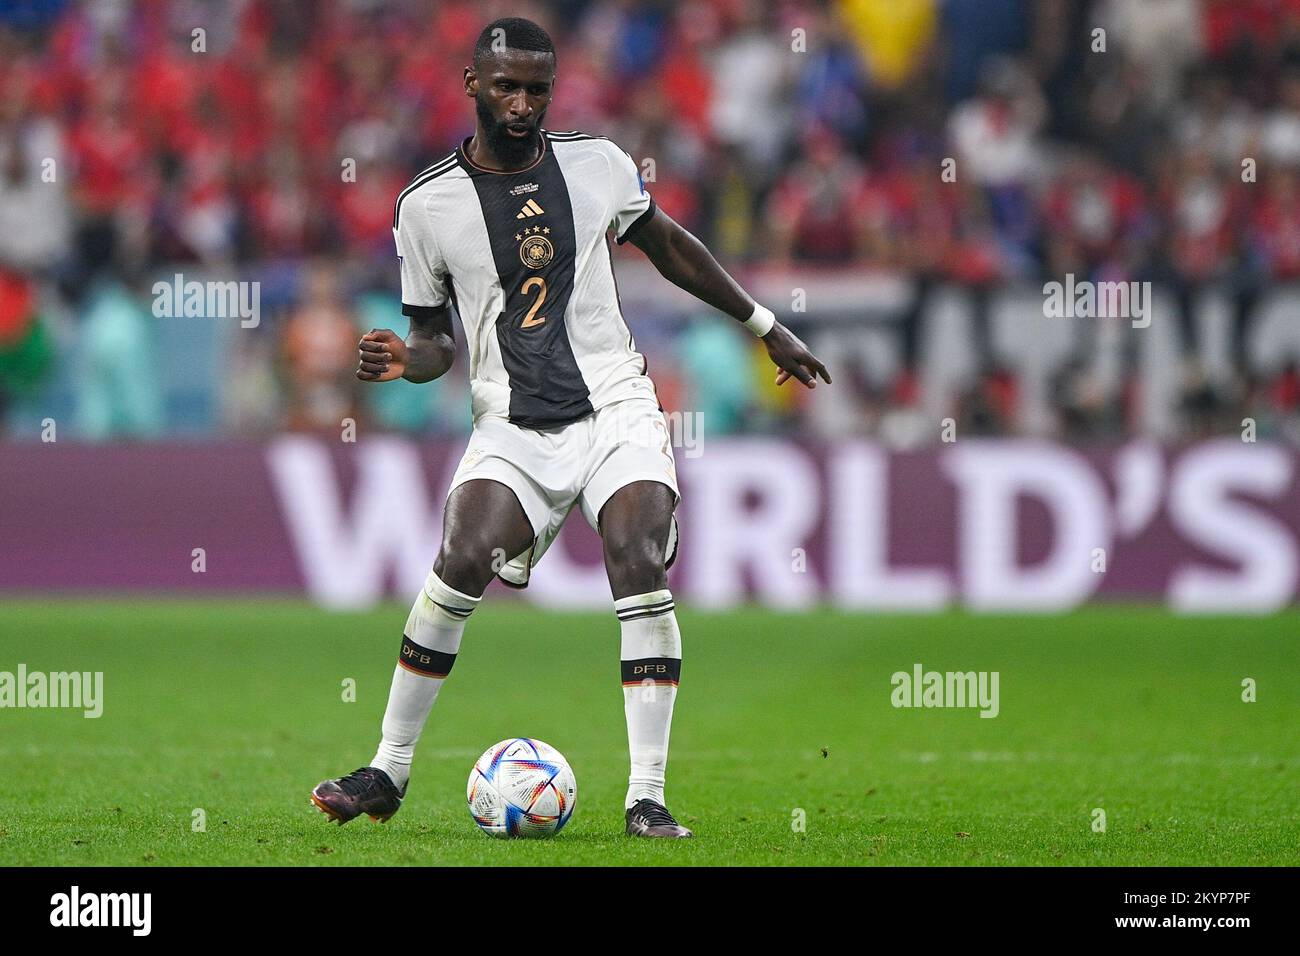 AL KHOR, QATAR - DECEMBER 1: Antonio Ruediger of Germany passes the ball during the Group E - FIFA World Cup Qatar 2022 match between Costa Rica and Germany at the Al Bayt Stadium on December 1, 2022 in Al Khor, Qatar (Photo by Pablo Morano/BSR Agency) Stock Photo